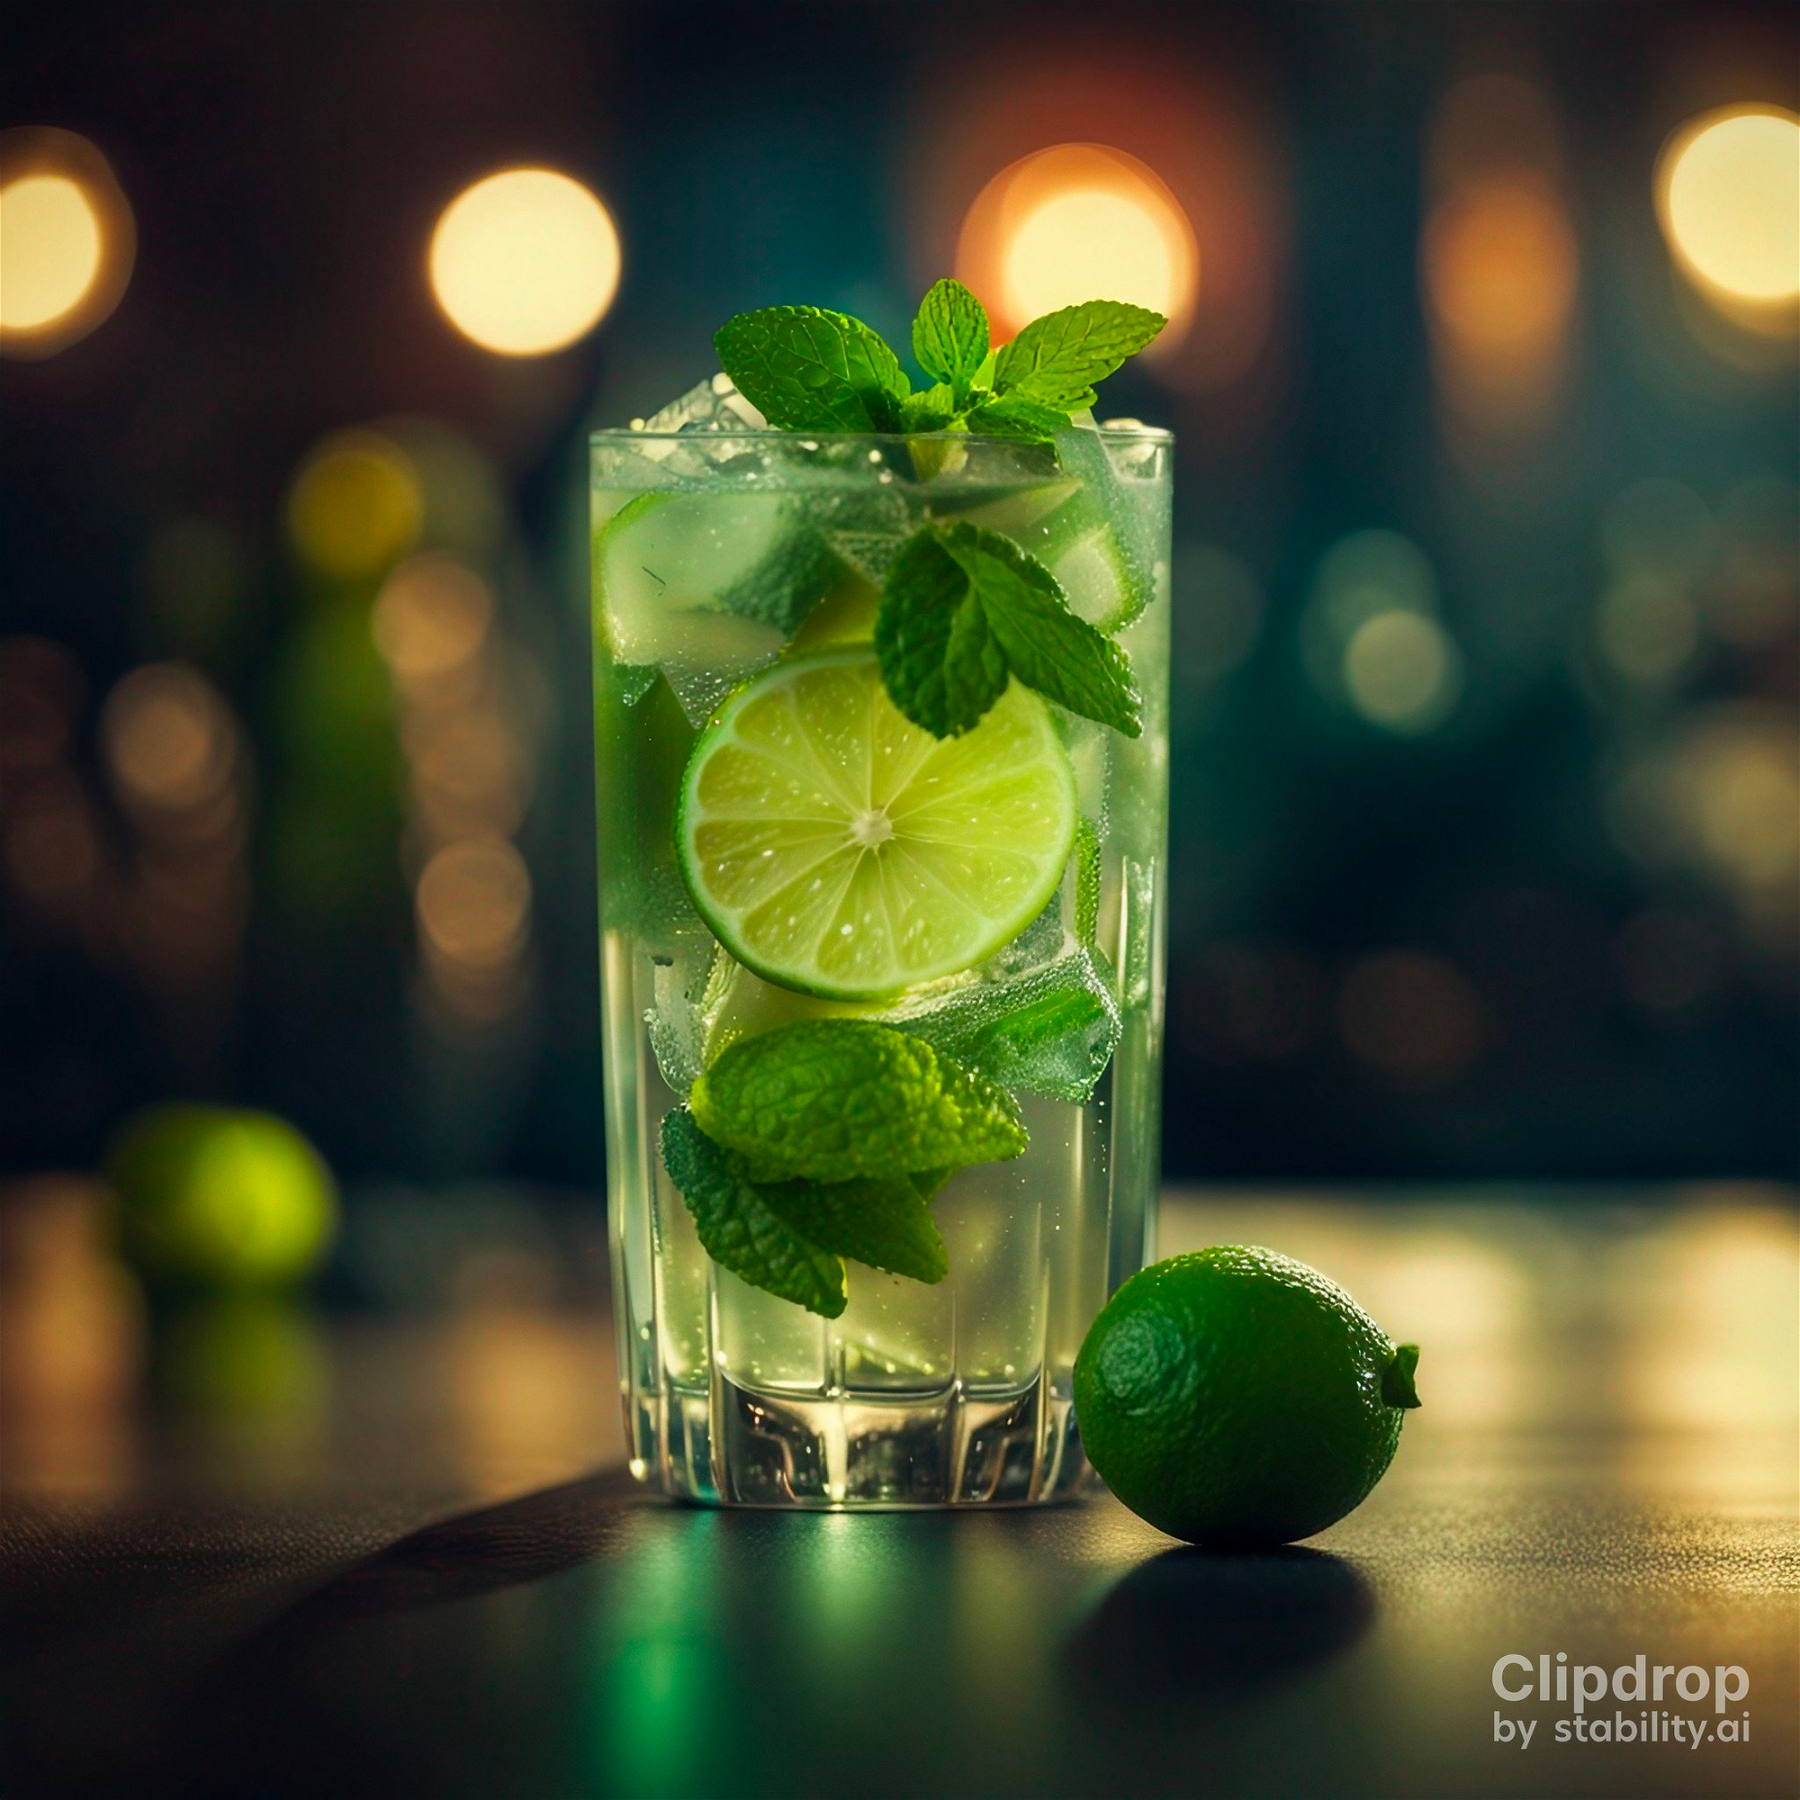 tumbler glass of mojito cocktail mixed with lime and mint, feeling fresh, close up, ultra realistic, super detailed, real photo
style: cinematic